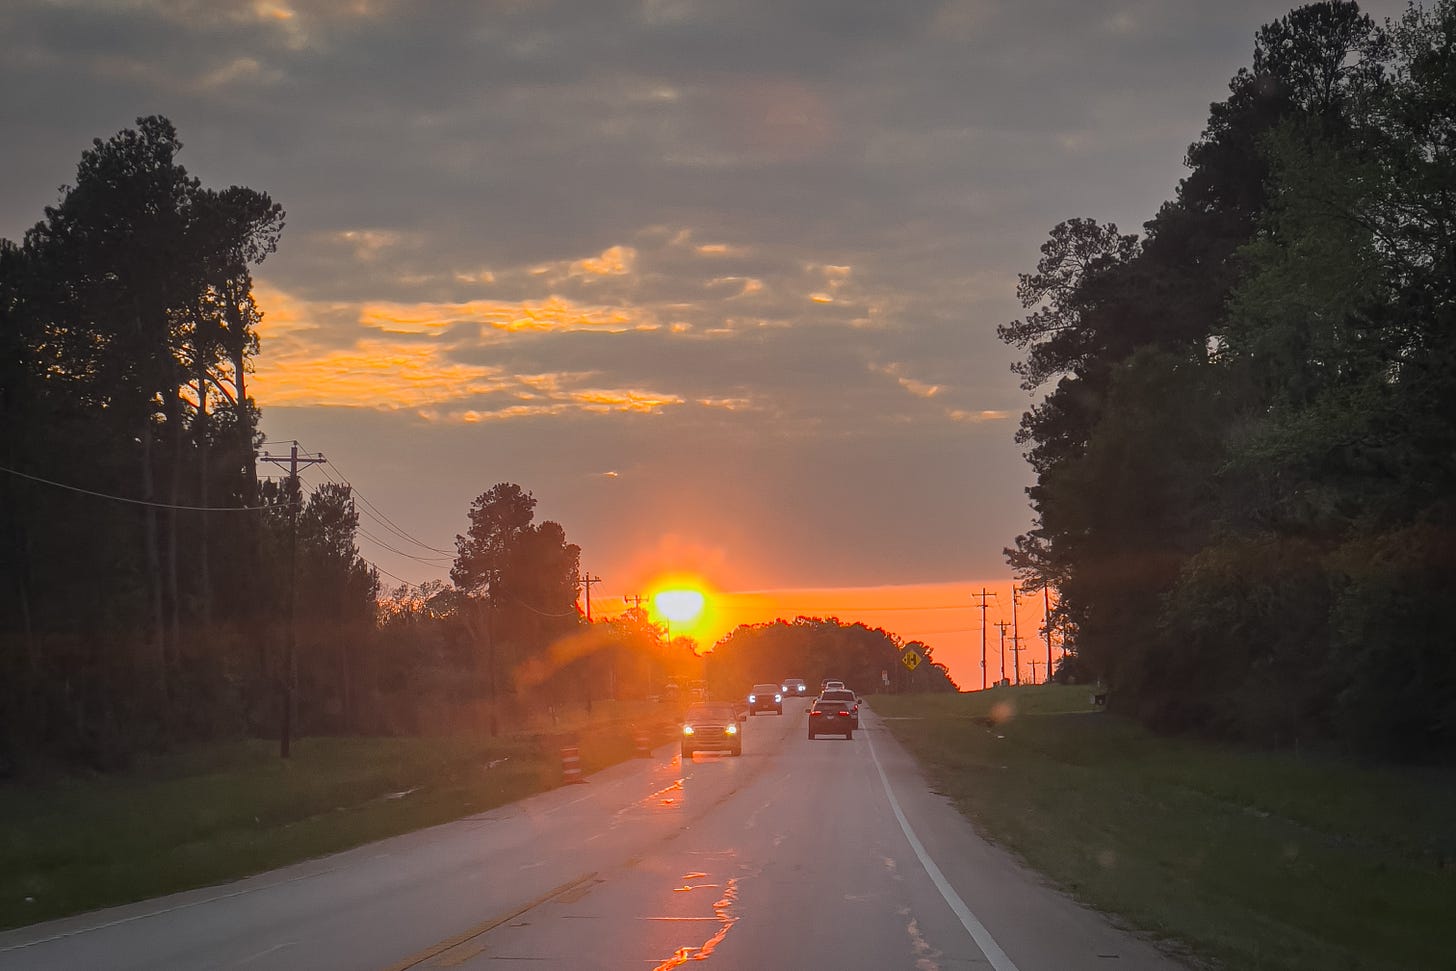 A country road with the sun-setting on the horizon;cars approaching with headlights, and the sun’s reflection on the wet asphalt road